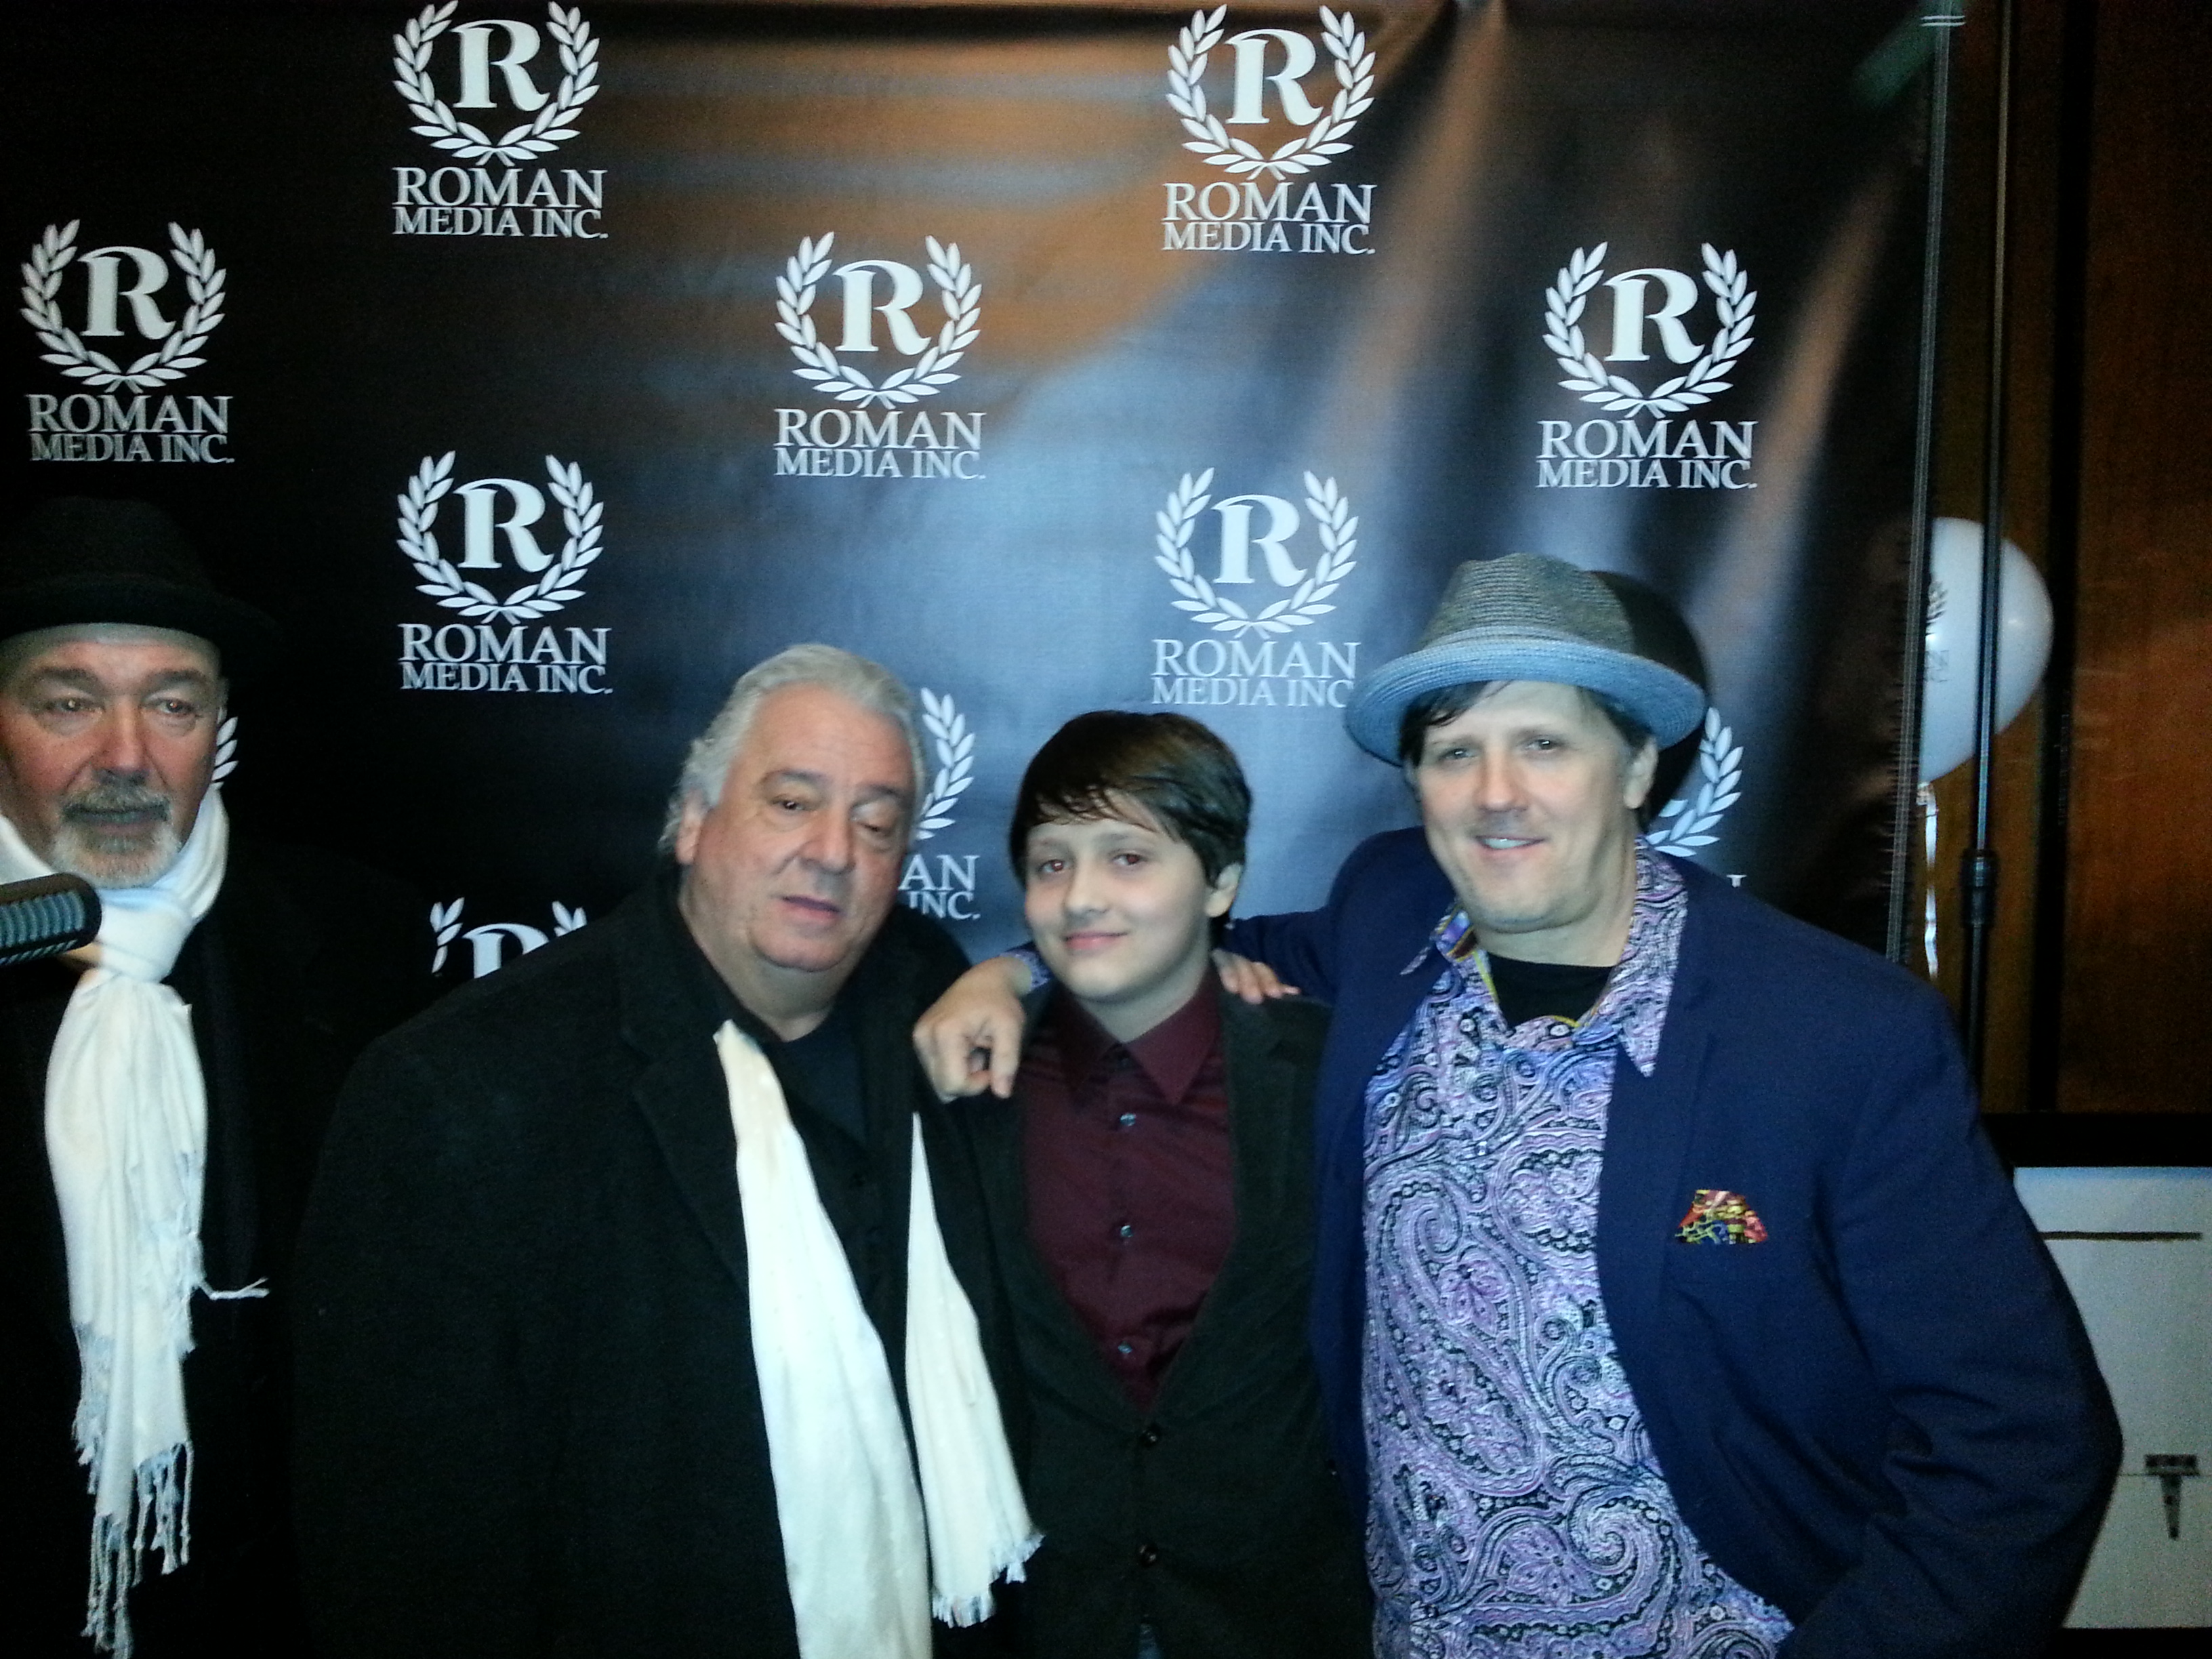 I'm with fellow actors, Donnie Tempesta on left, Vinny from the Sopranos, my son Ricky Kraby and Me!